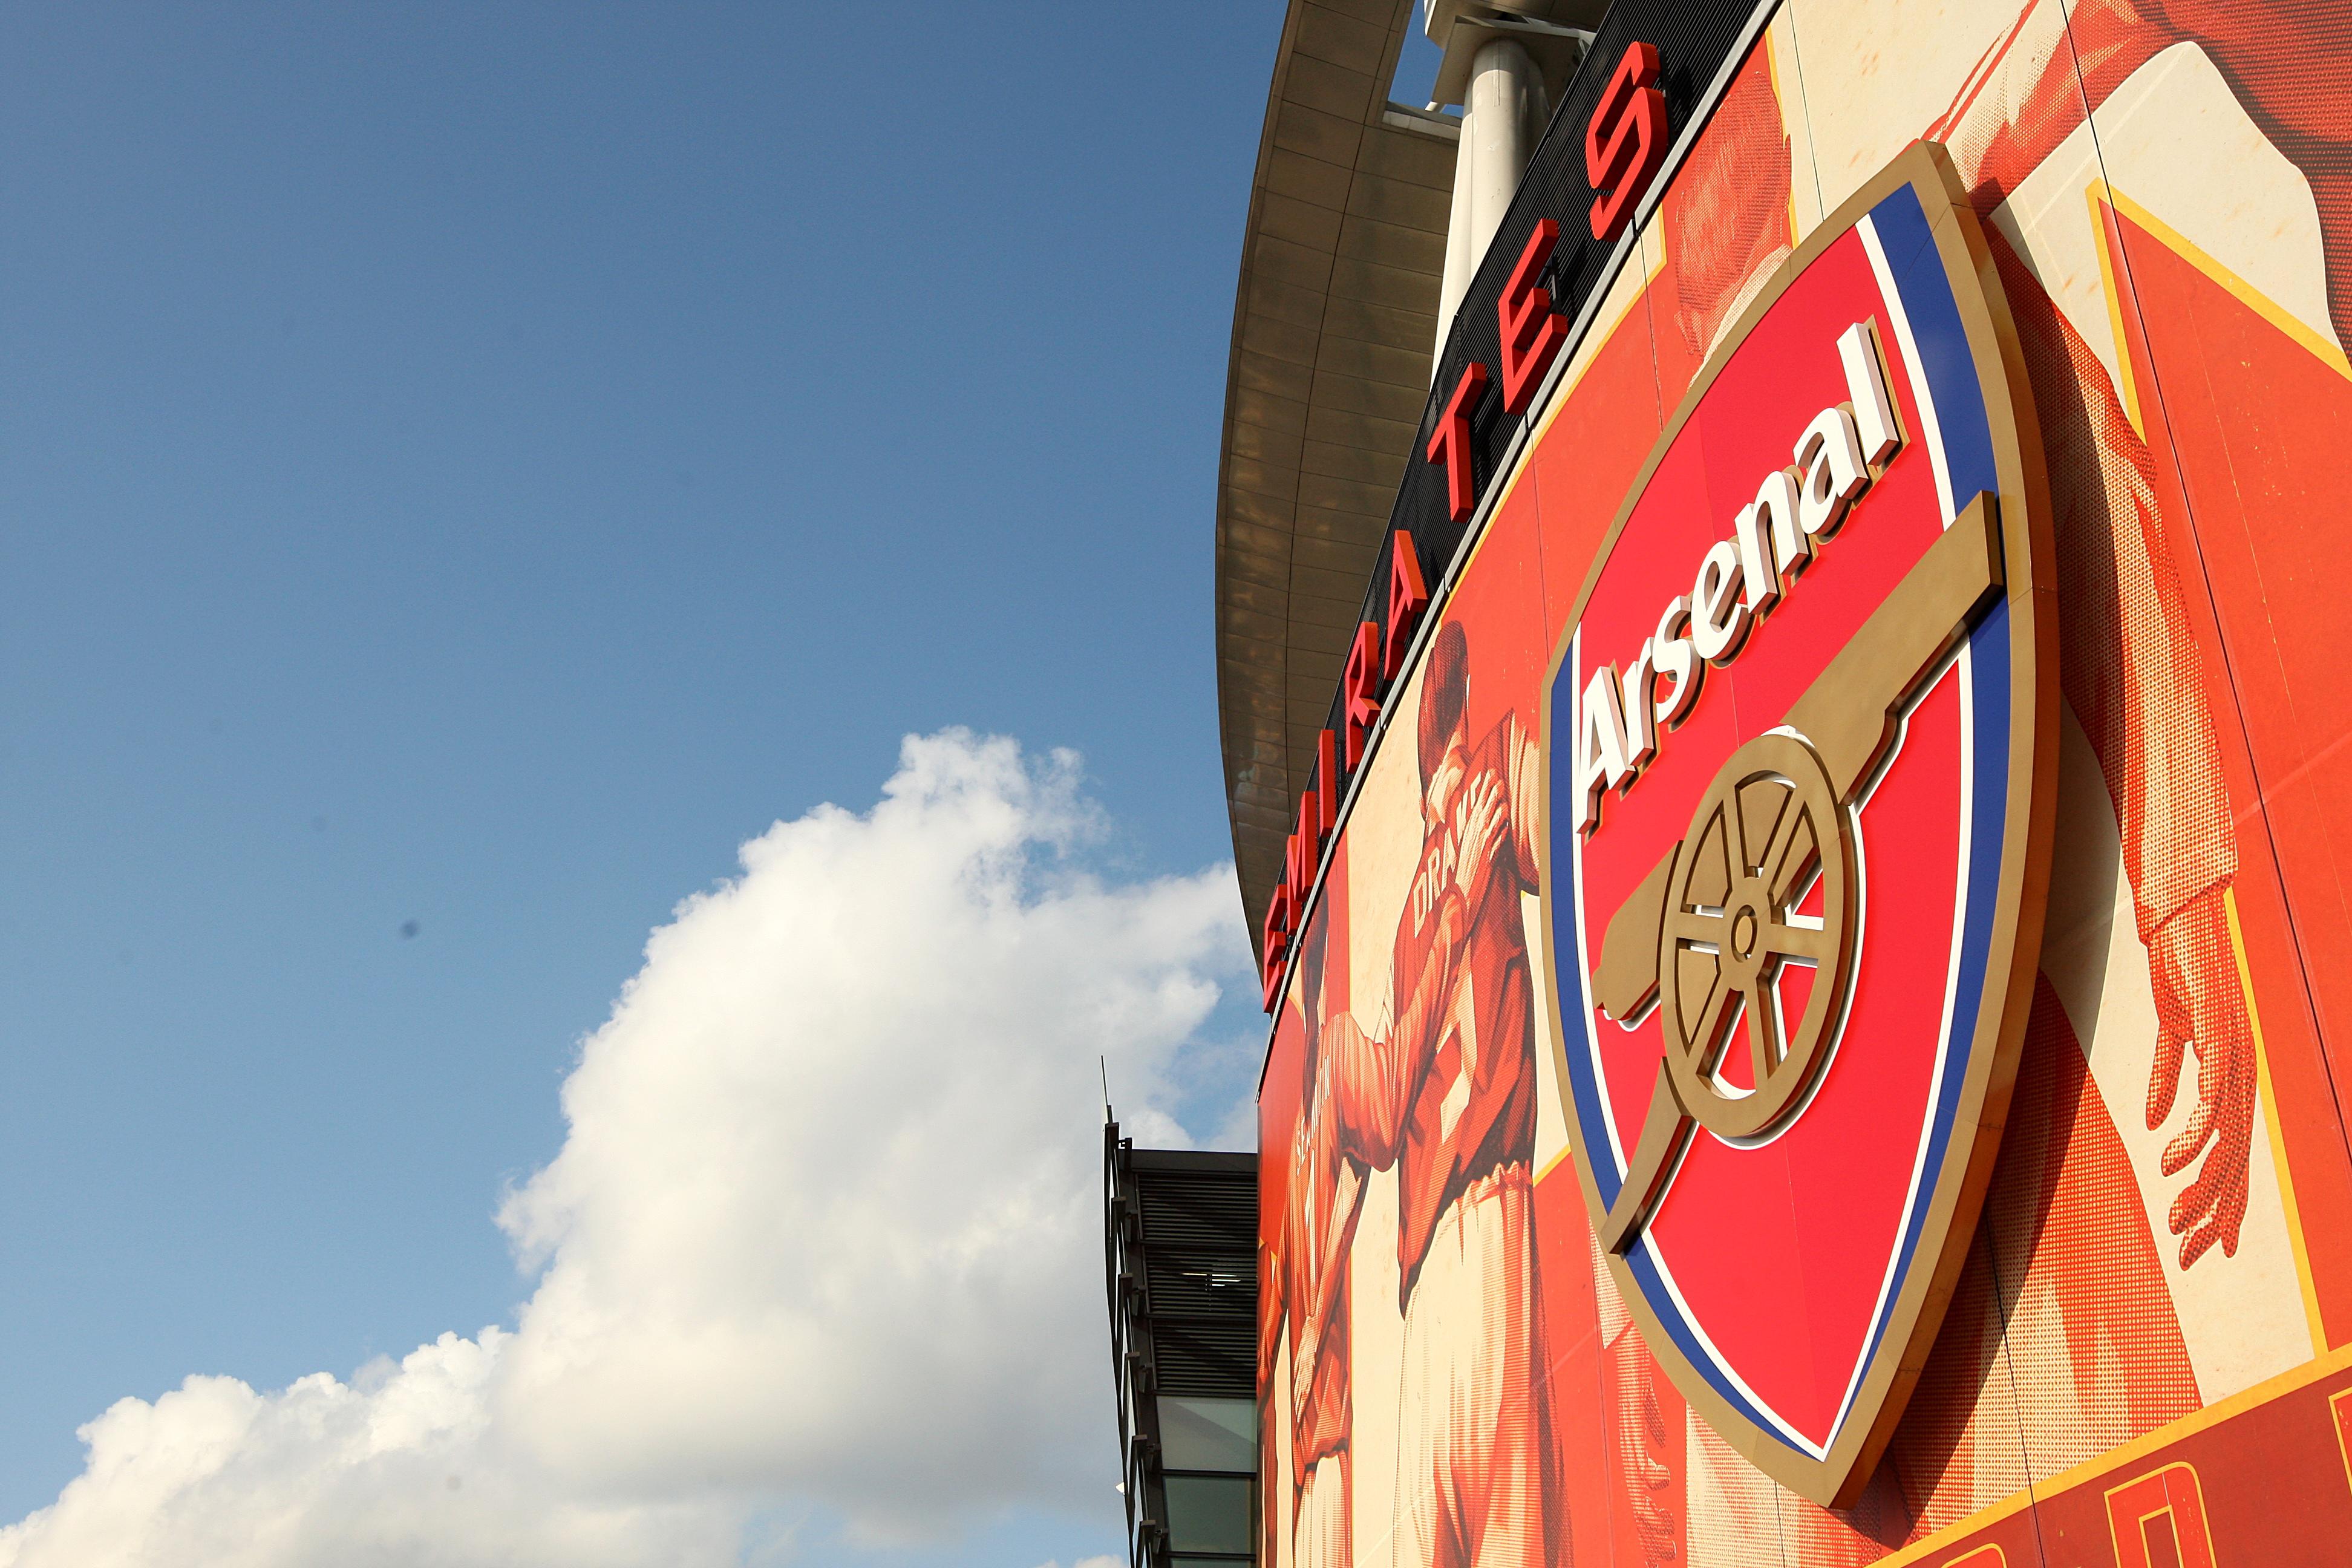 Arsenal player's yellow card sparks FA probe after 'unusual' bet